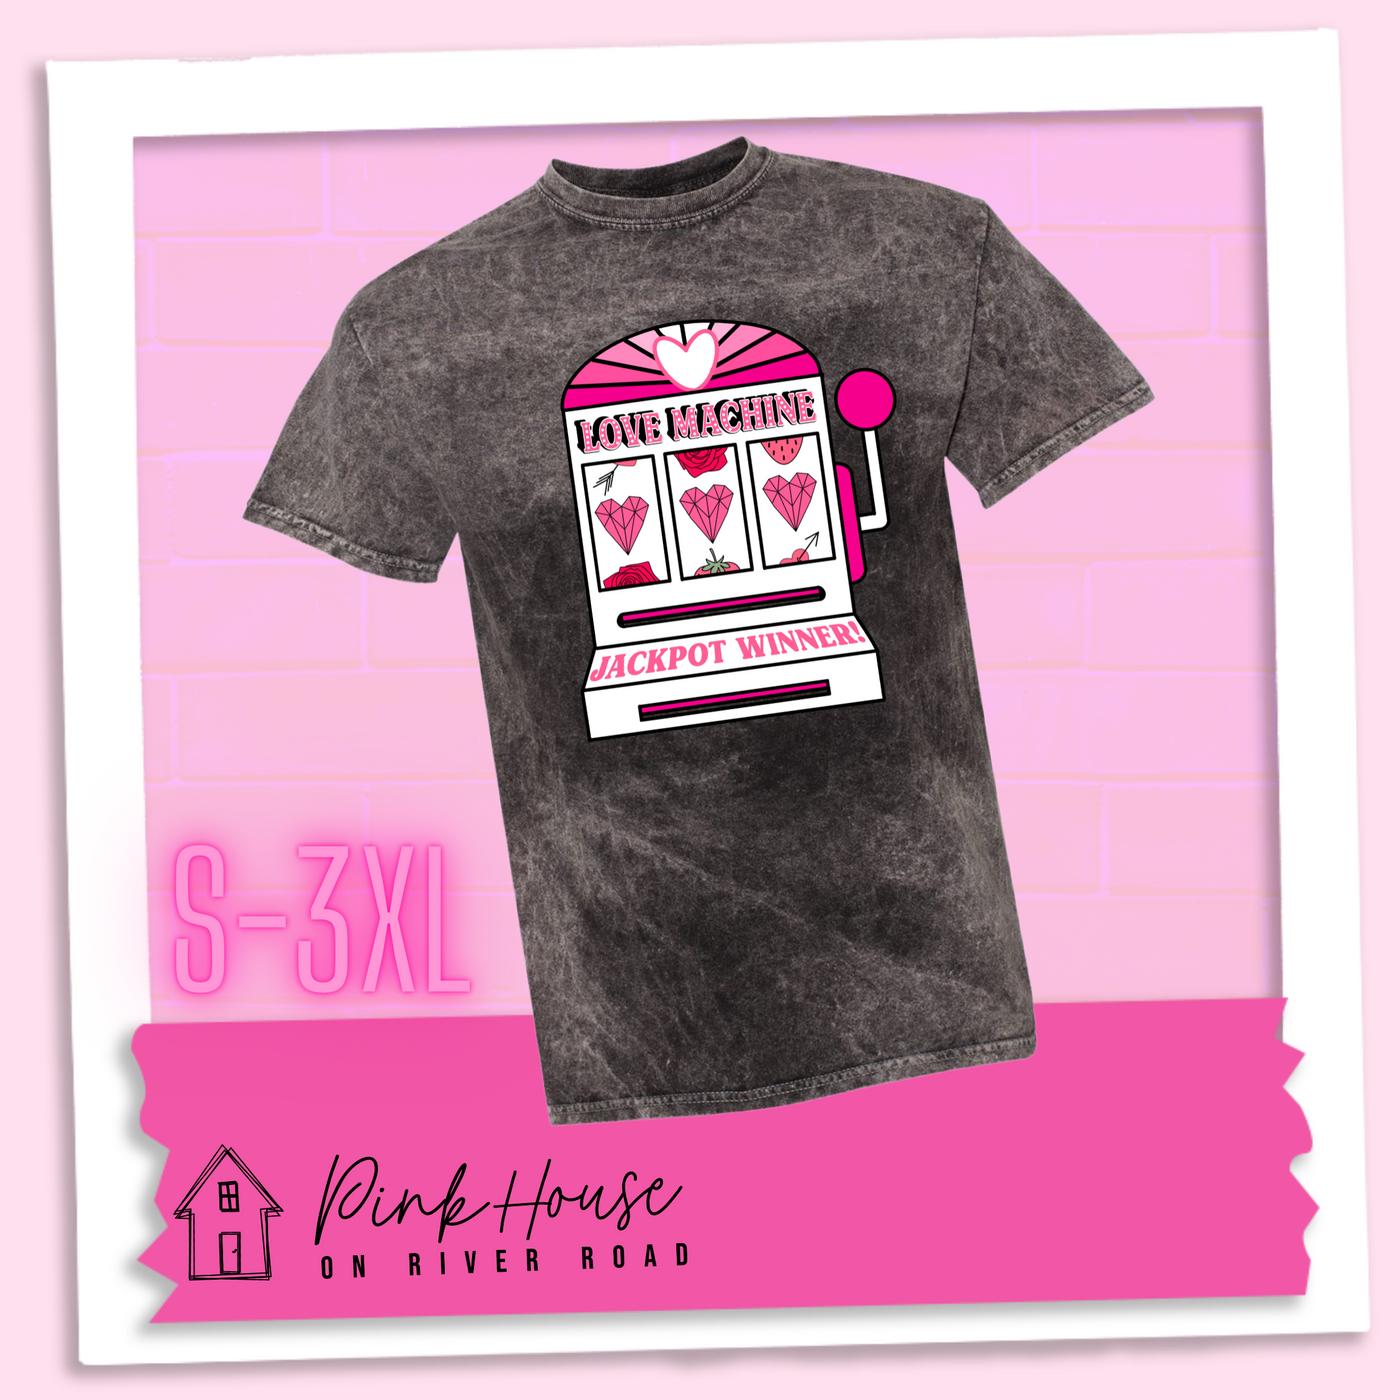 Black Mineral Wash Tee with a graphic. Graphic is of a white slot machine with pink accents at the top of the slot machine is an arch with different shades of pink and a heart cut out of the middle. Underneath the are are the words Love machine in hot pink with white dots to look like lights. the reels of the slot machines show three geometric hearts. The slot pull has a pink base with a white handle and pink knob on it. Under the reels are the words Jackpot Winner in pink.